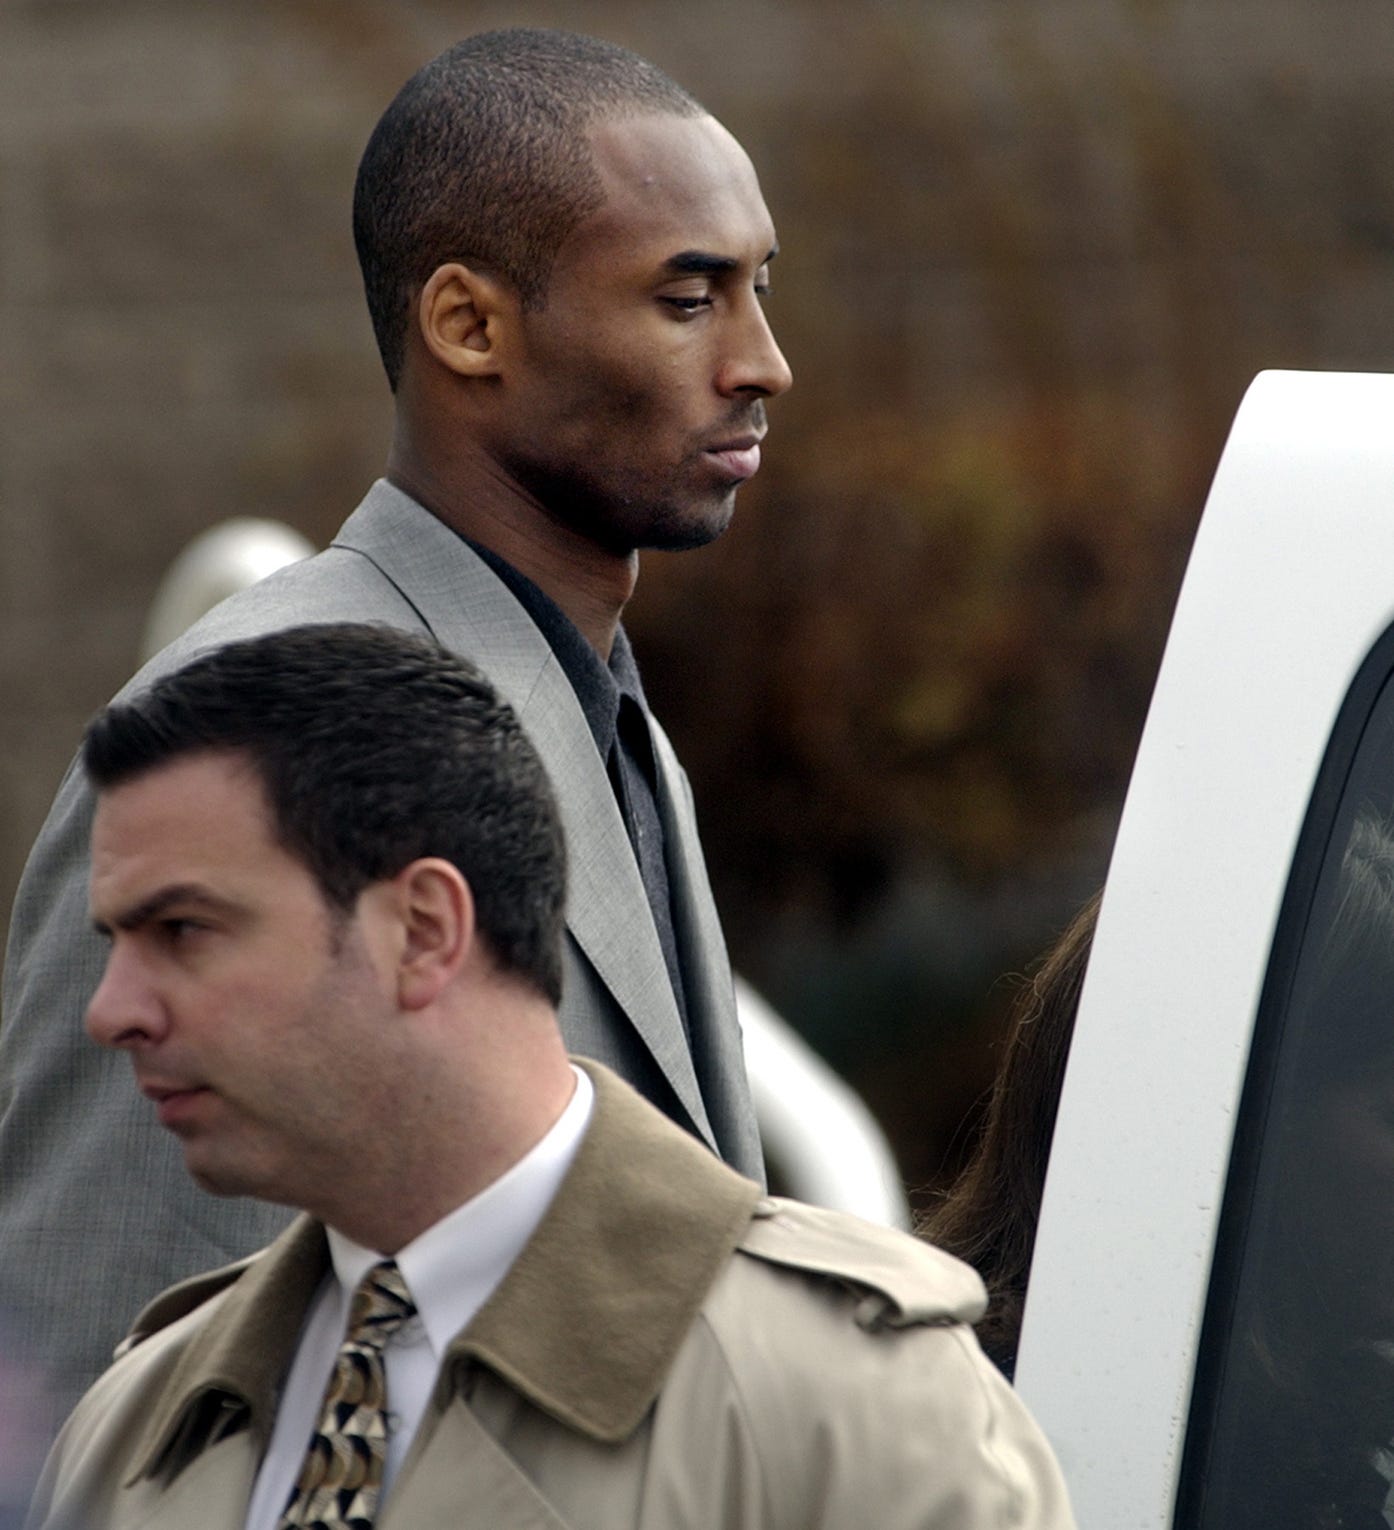 Kobe Bryant leaves court accompanied by security at the Justice Center in Eagle, Colo, on Nov. 13, 2003. He was accused of sexual assault, but the case was dropped.